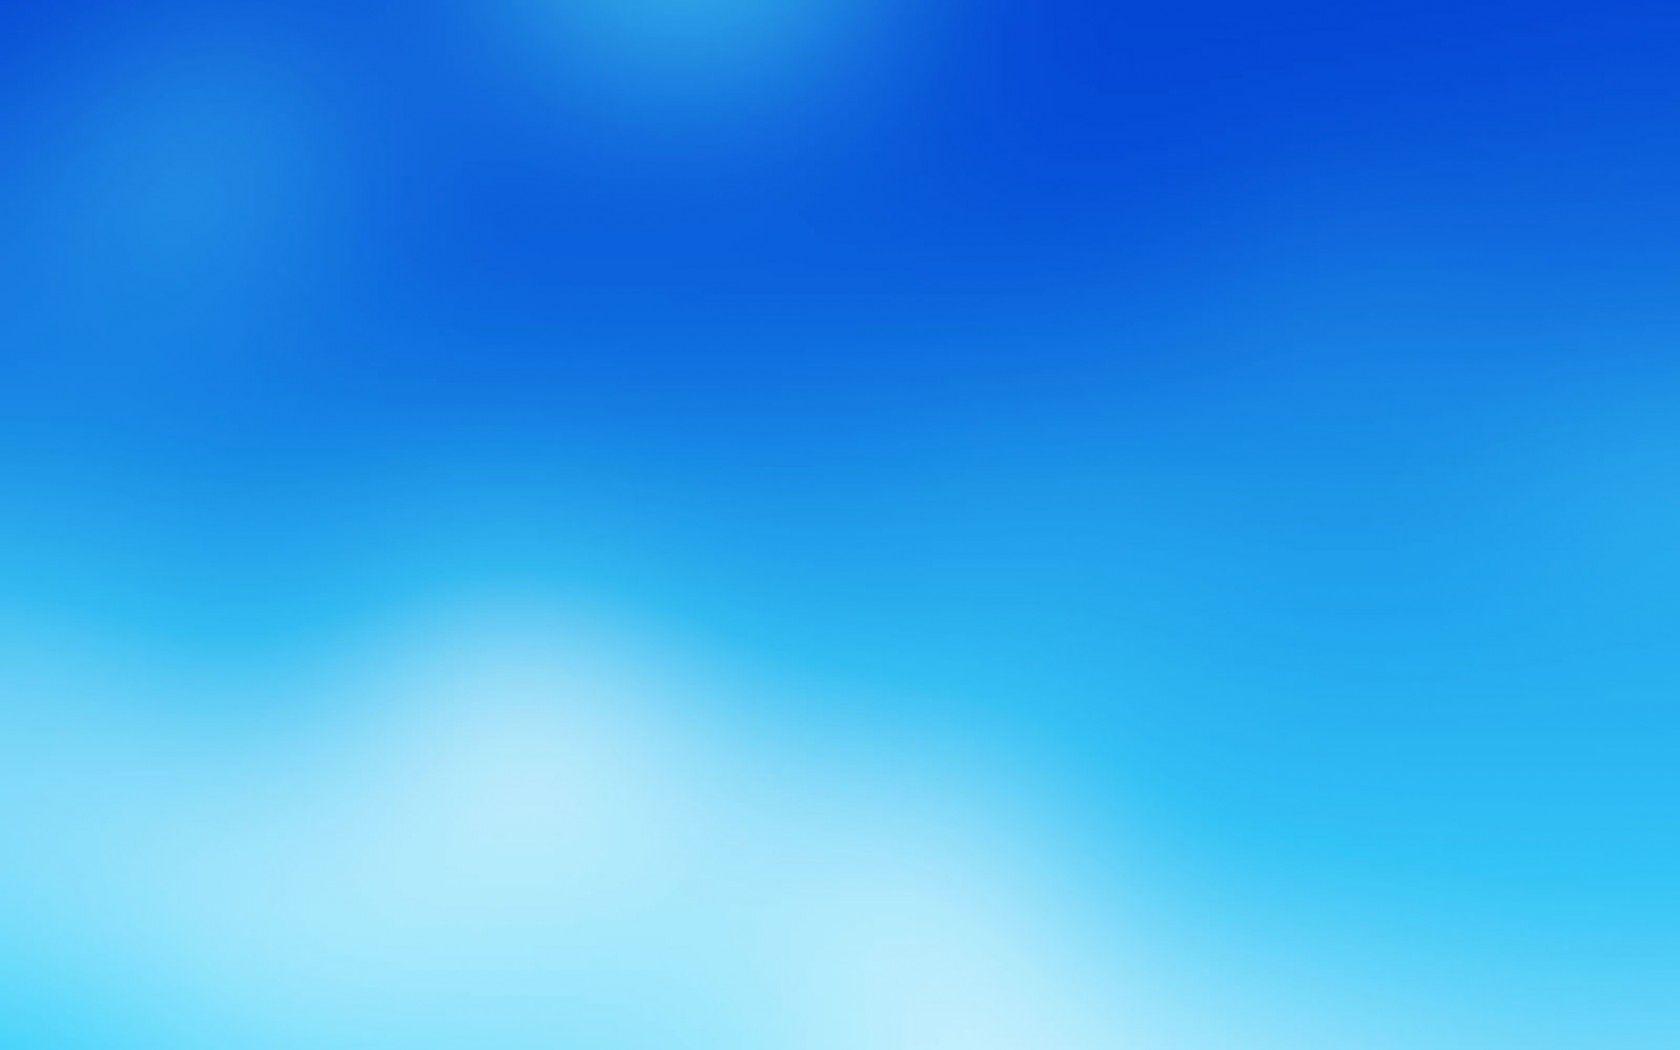 Classy Skilled Background Affected Wallpaper Scenic Sky Blue